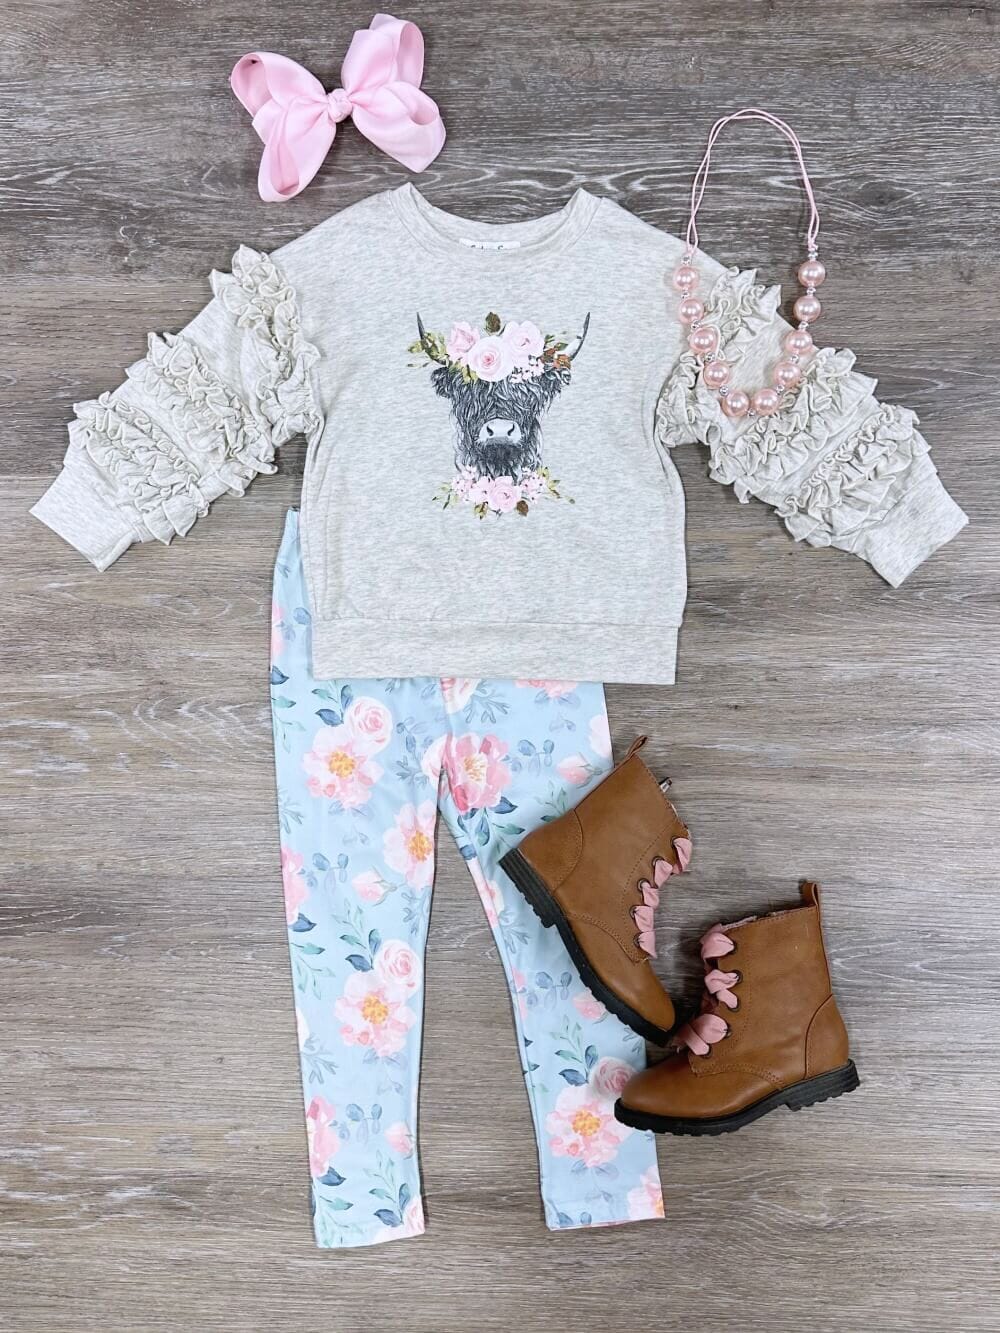 Flower Cow Ruffle Top & Leggings Girls 2 Piece Outfit